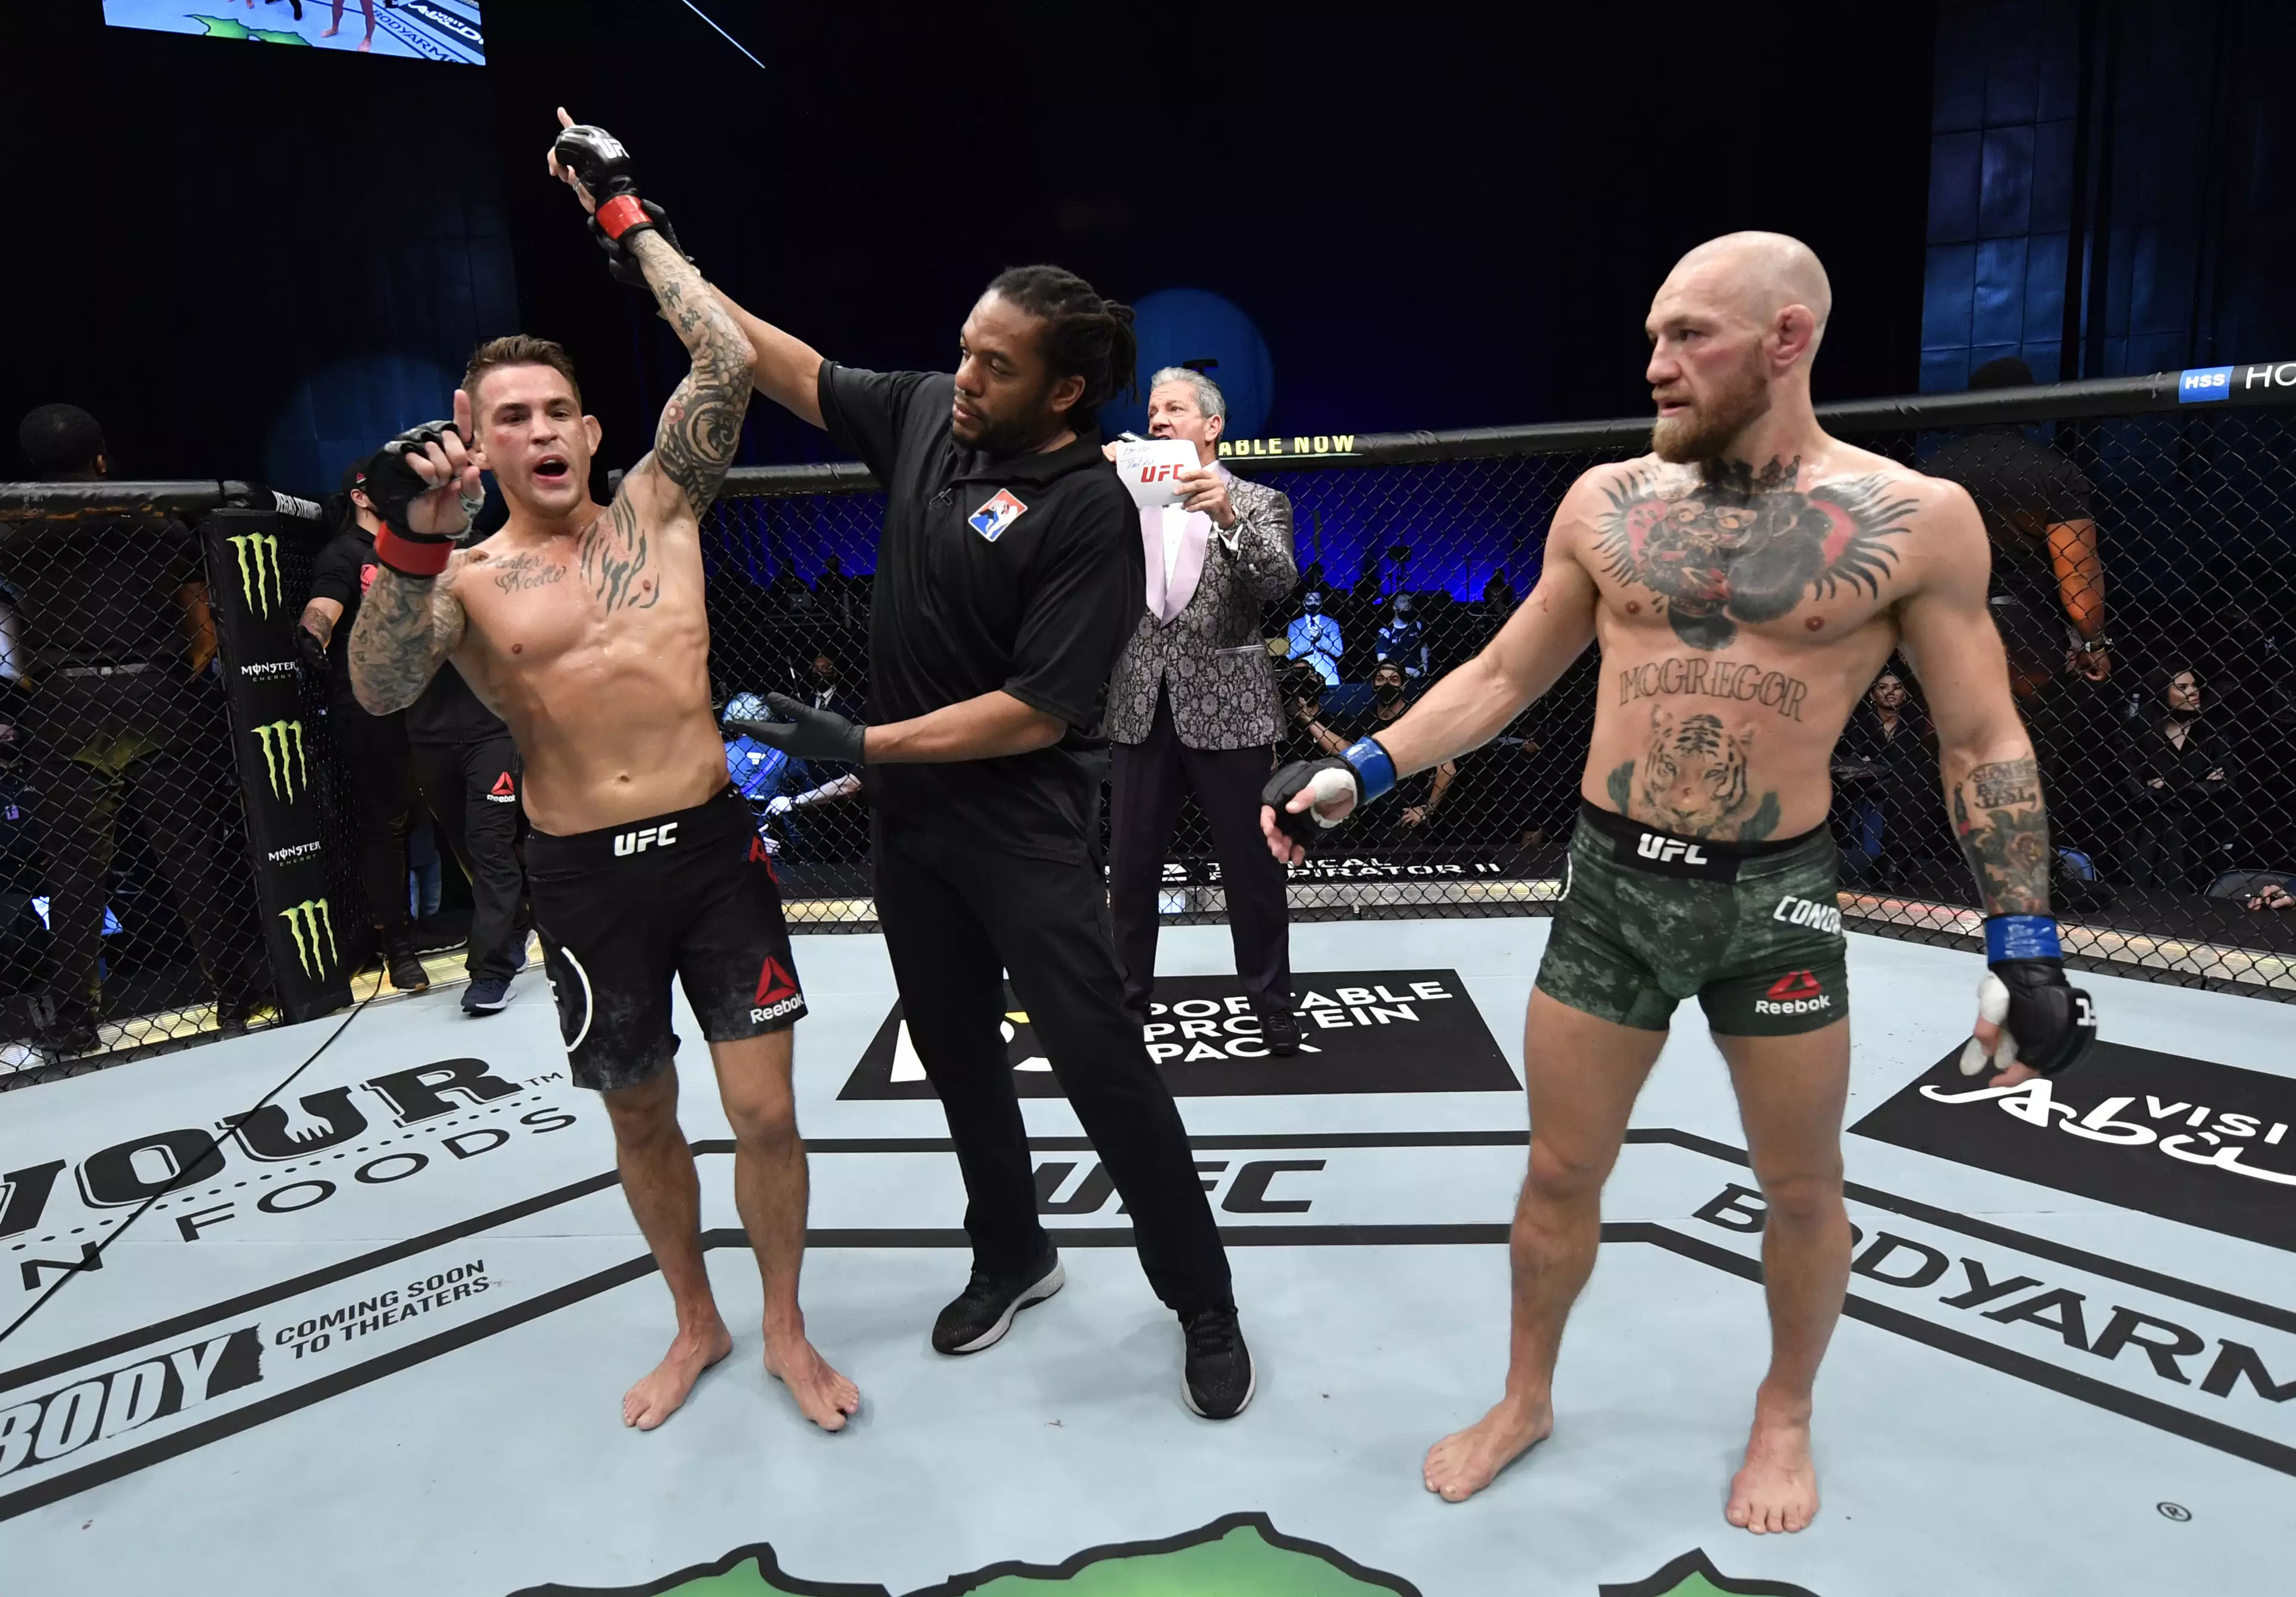 Dustin Poirier upset the odds to beat Conor McGregor at UFC 257.